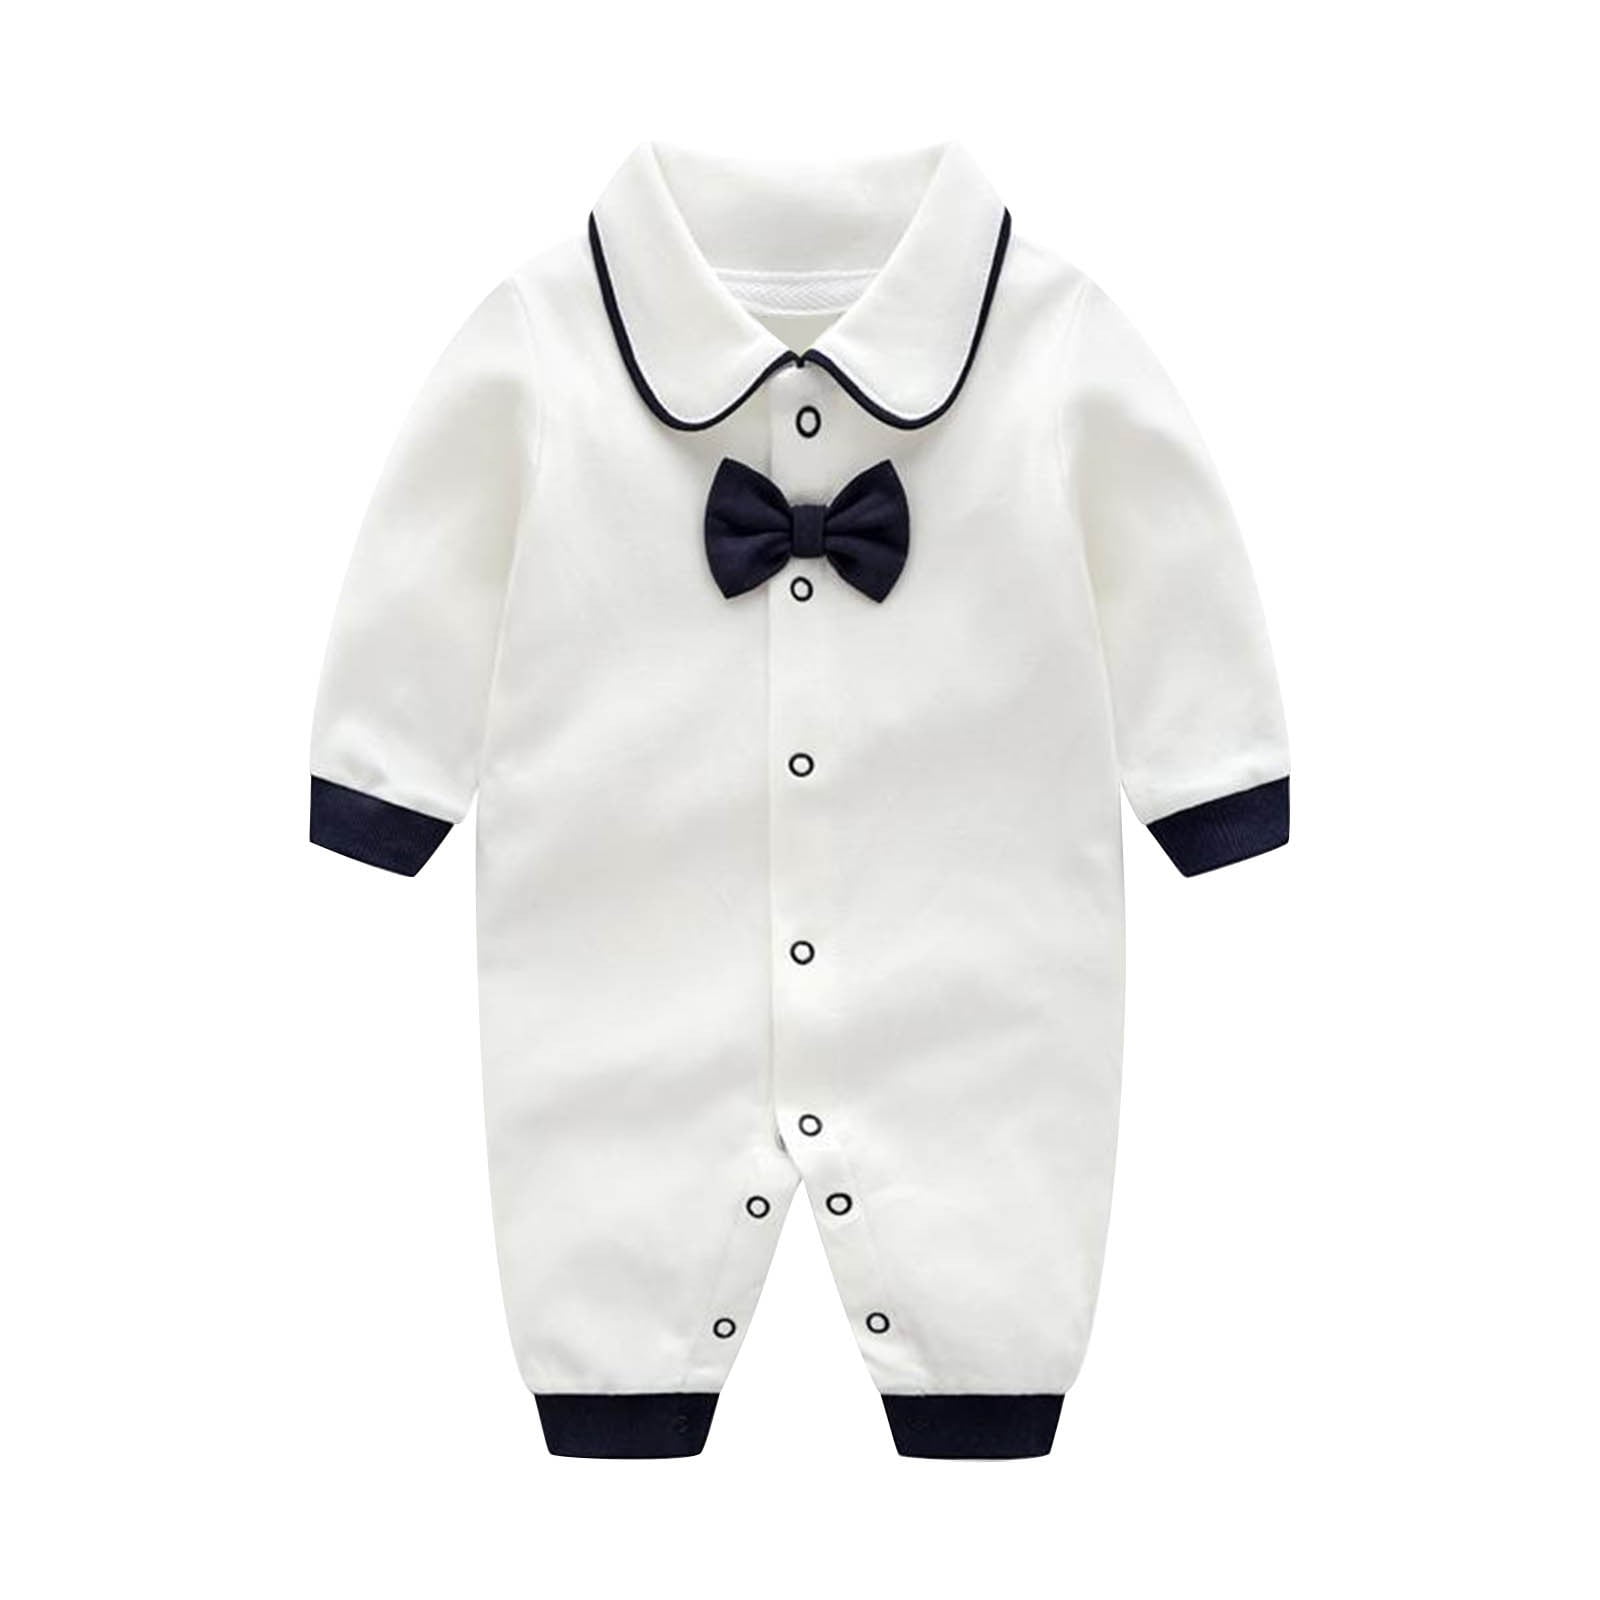 Baby Boys Bow Long Sleeve Outsie Bodysuit Banquet Wedding Jumpsuit ...